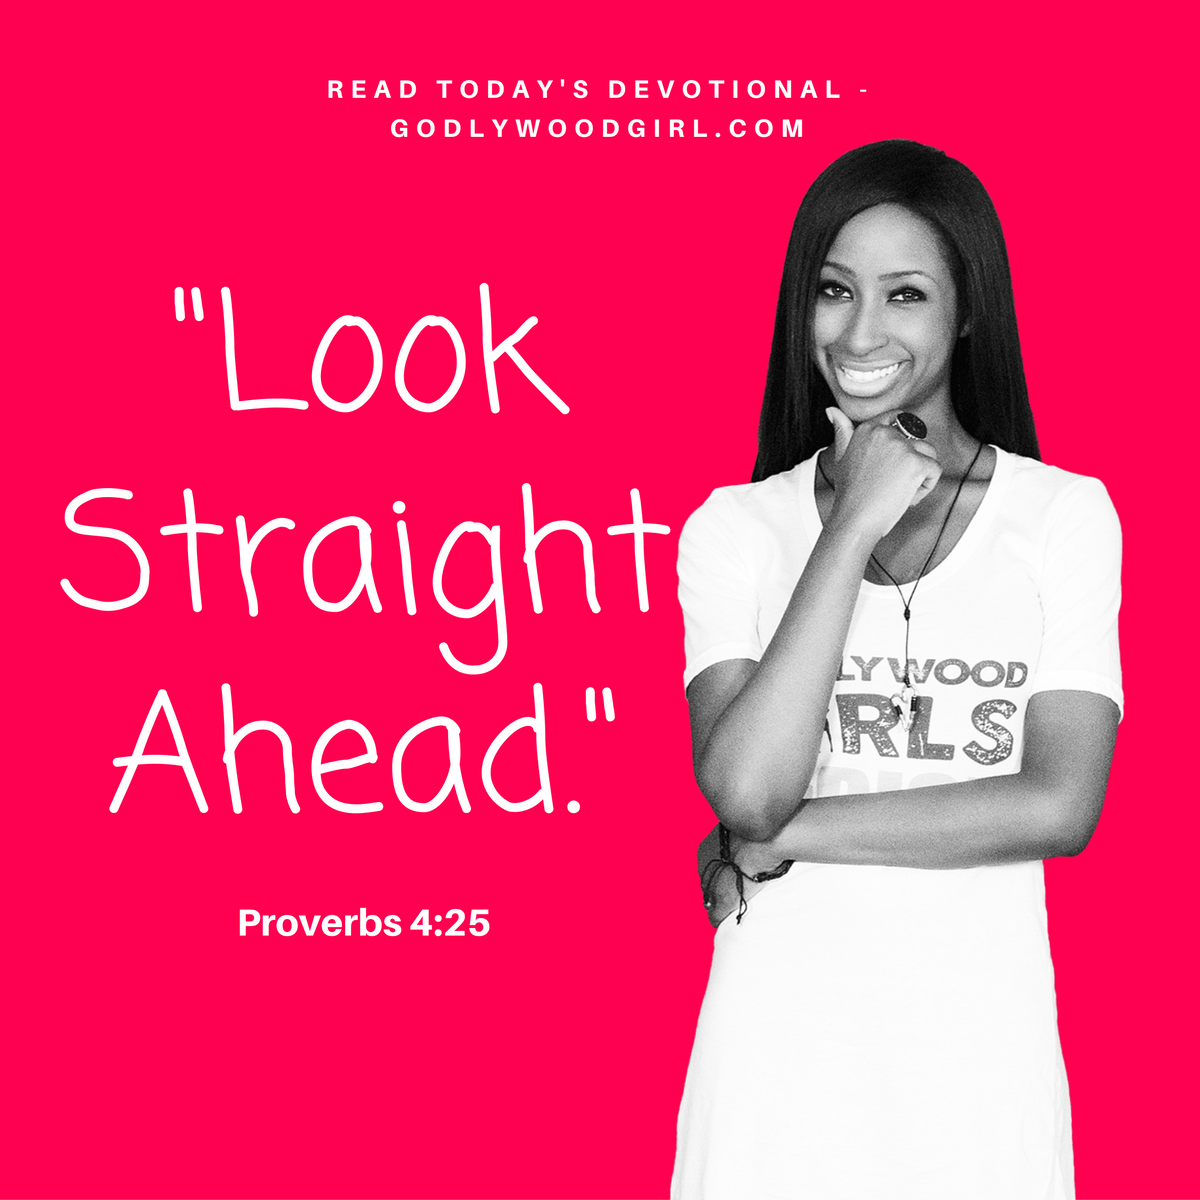 Today's Daily Devotional For Women - Look Straight Ahead